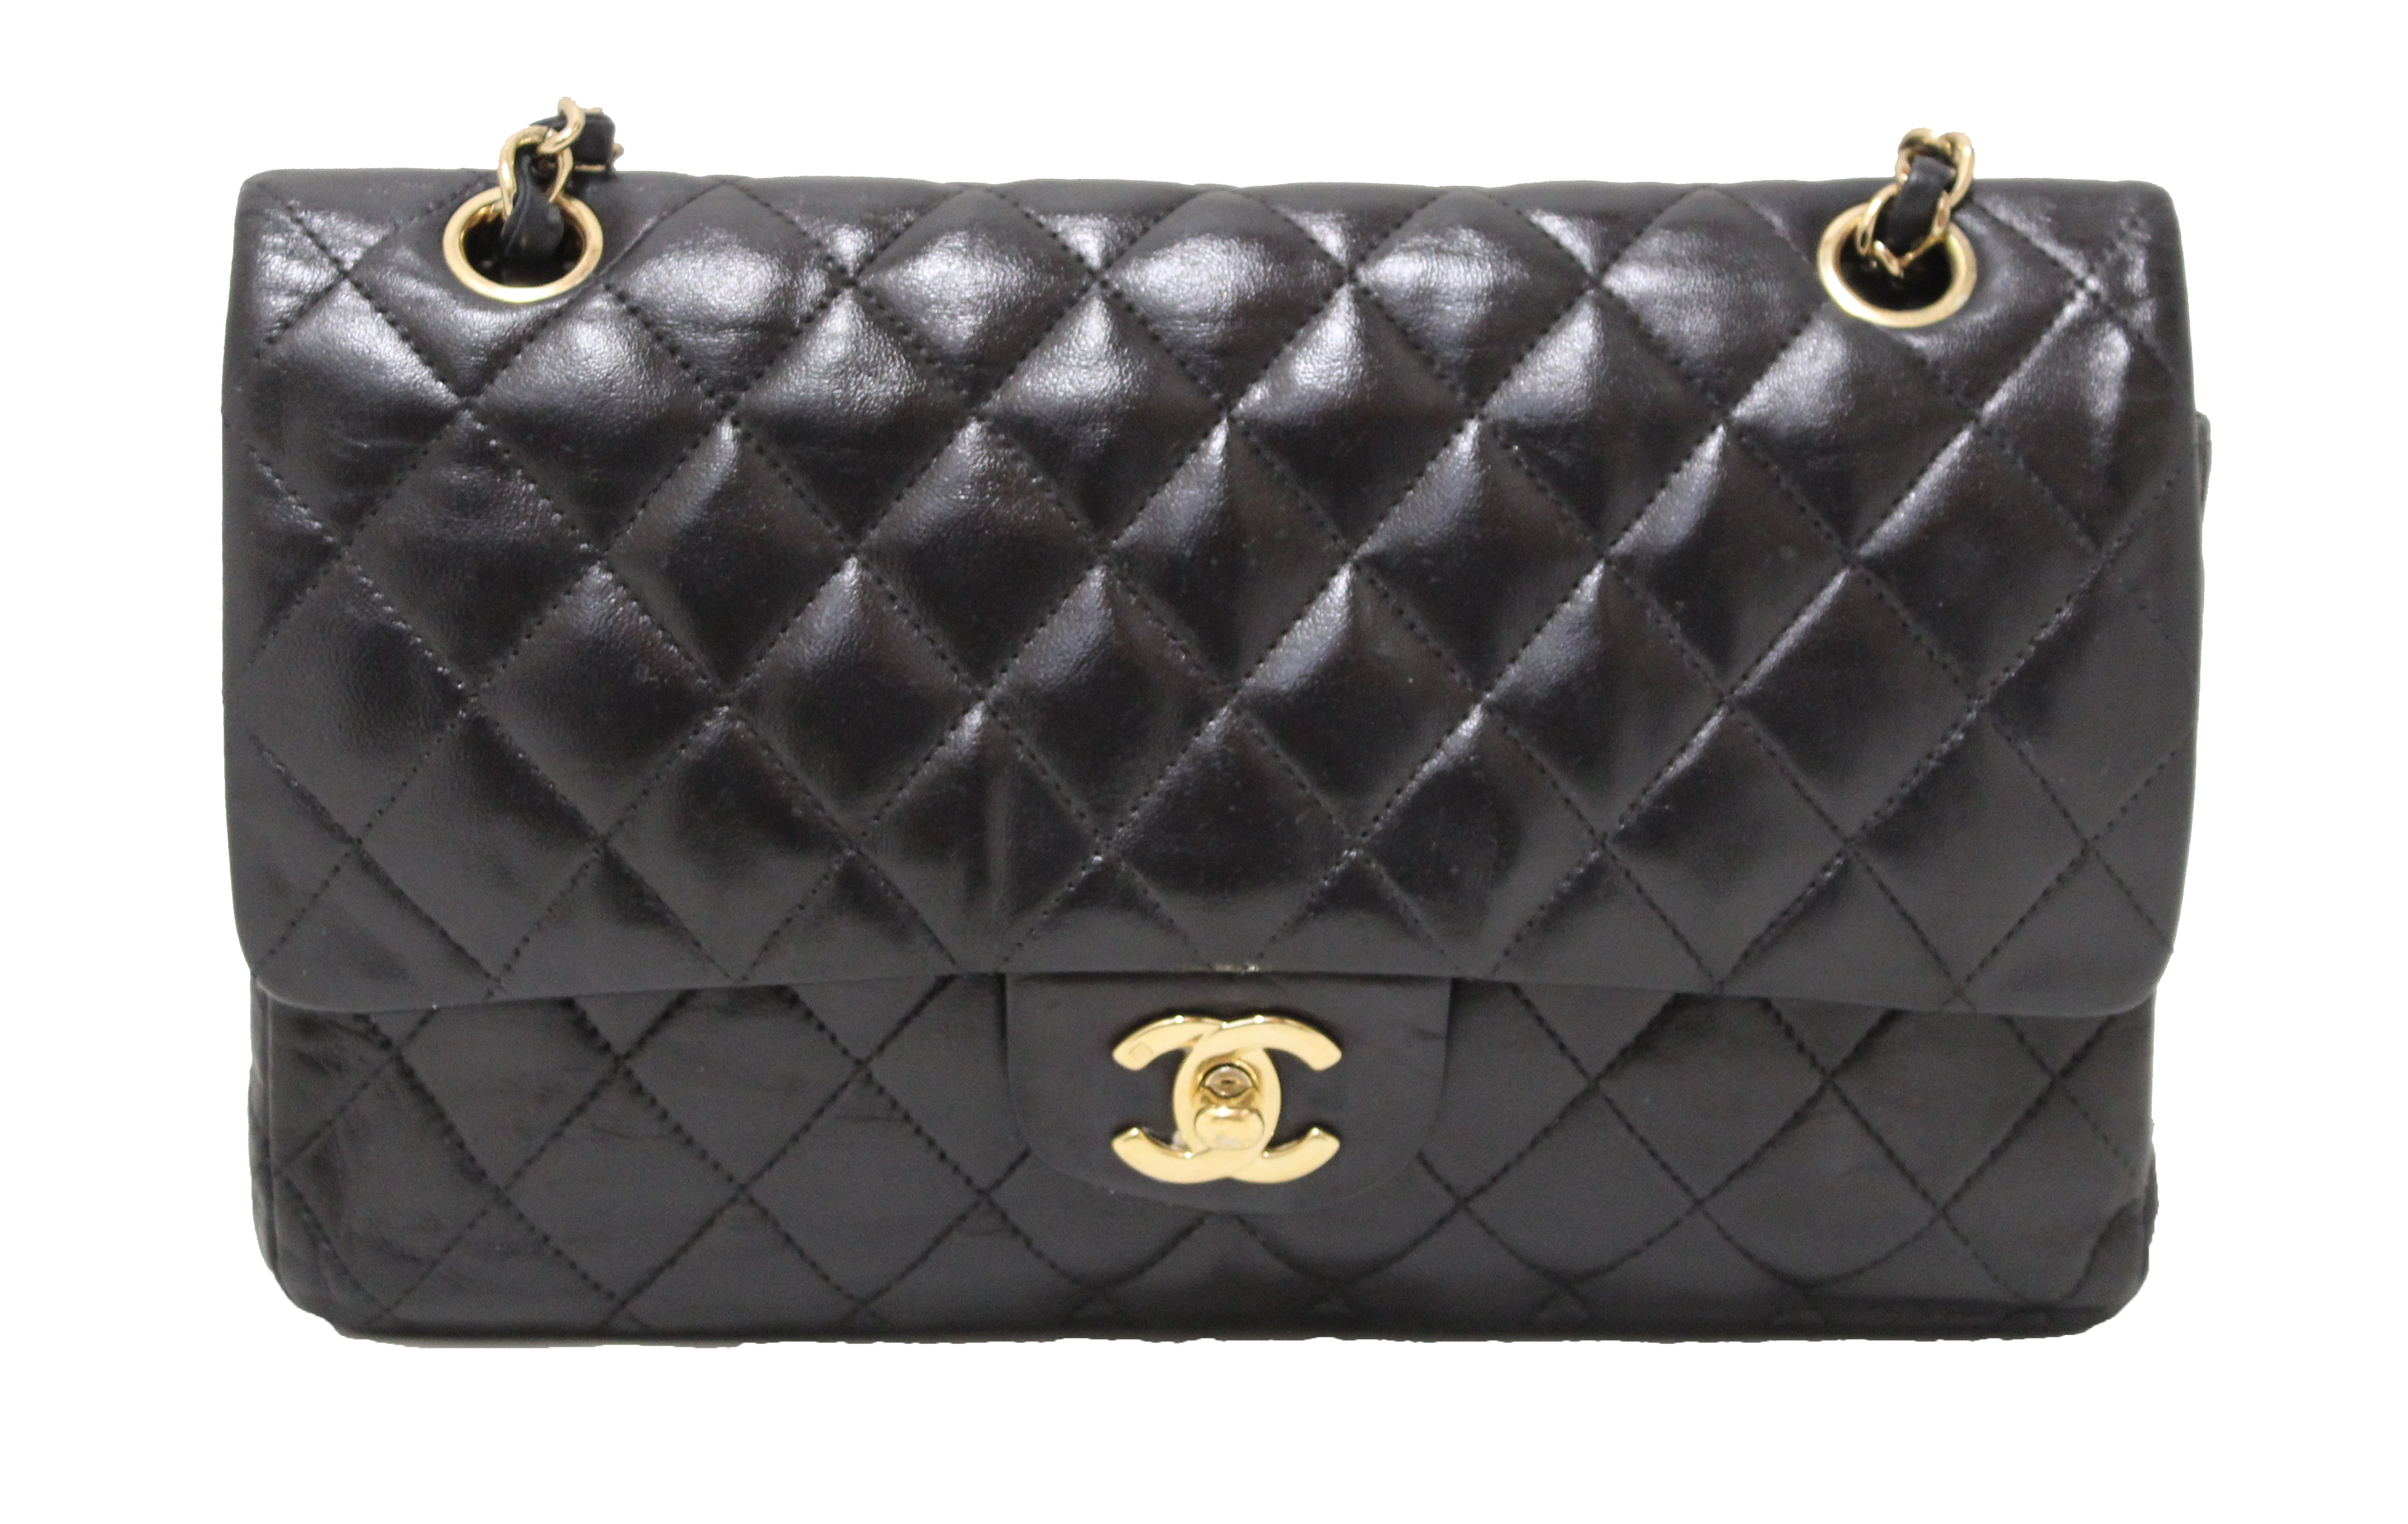 Chanel Boy Quilted New Medium Flap Black Lambskin Leather Cross